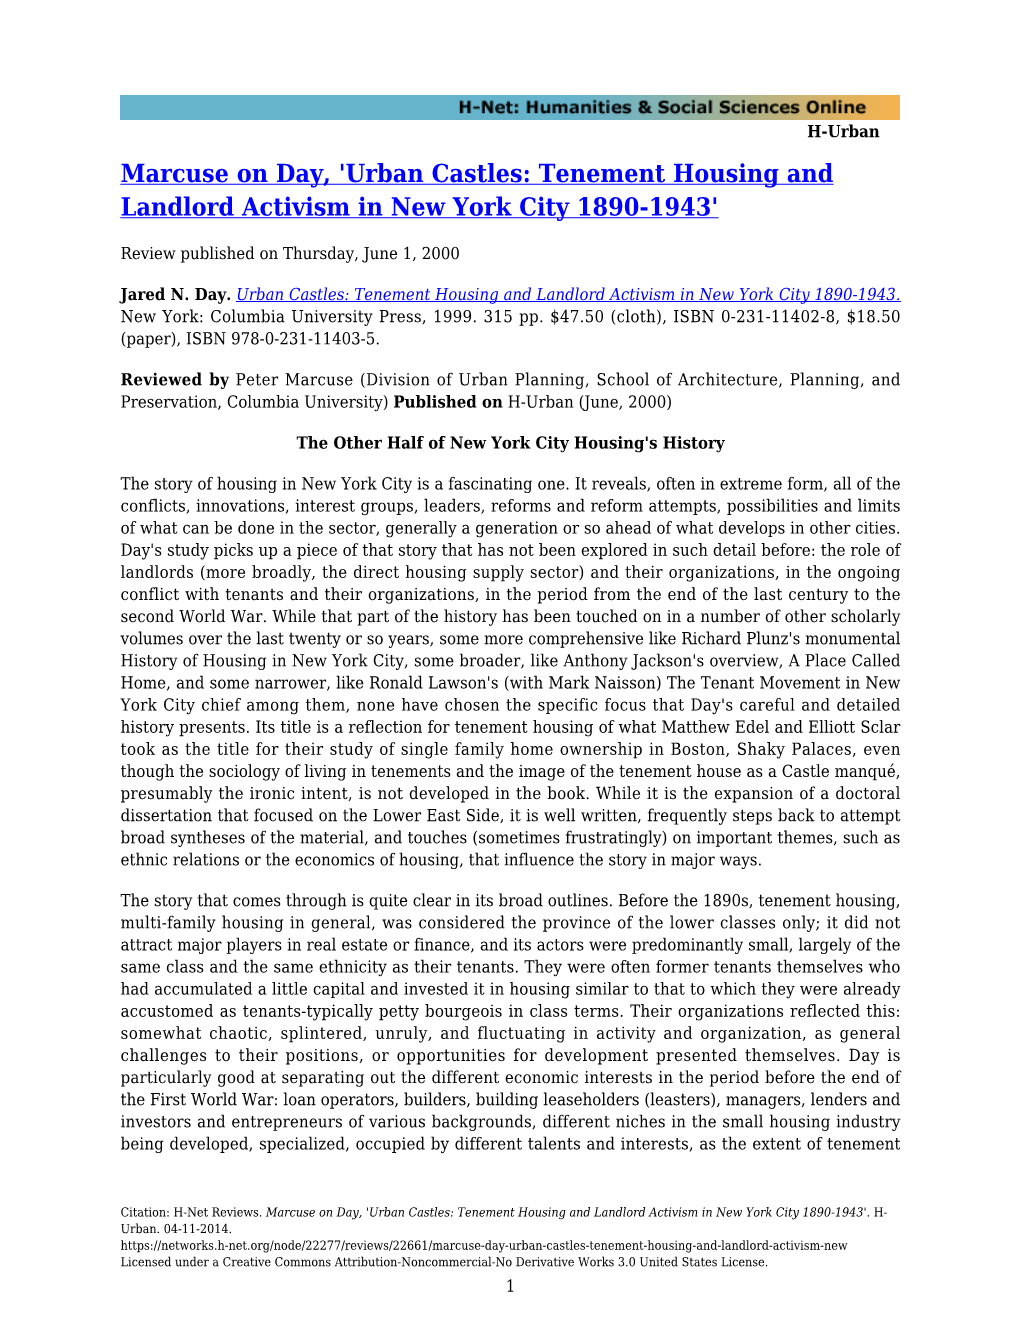 Marcuse on Day, 'Urban Castles: Tenement Housing and Landlord Activism in New York City 1890-1943'